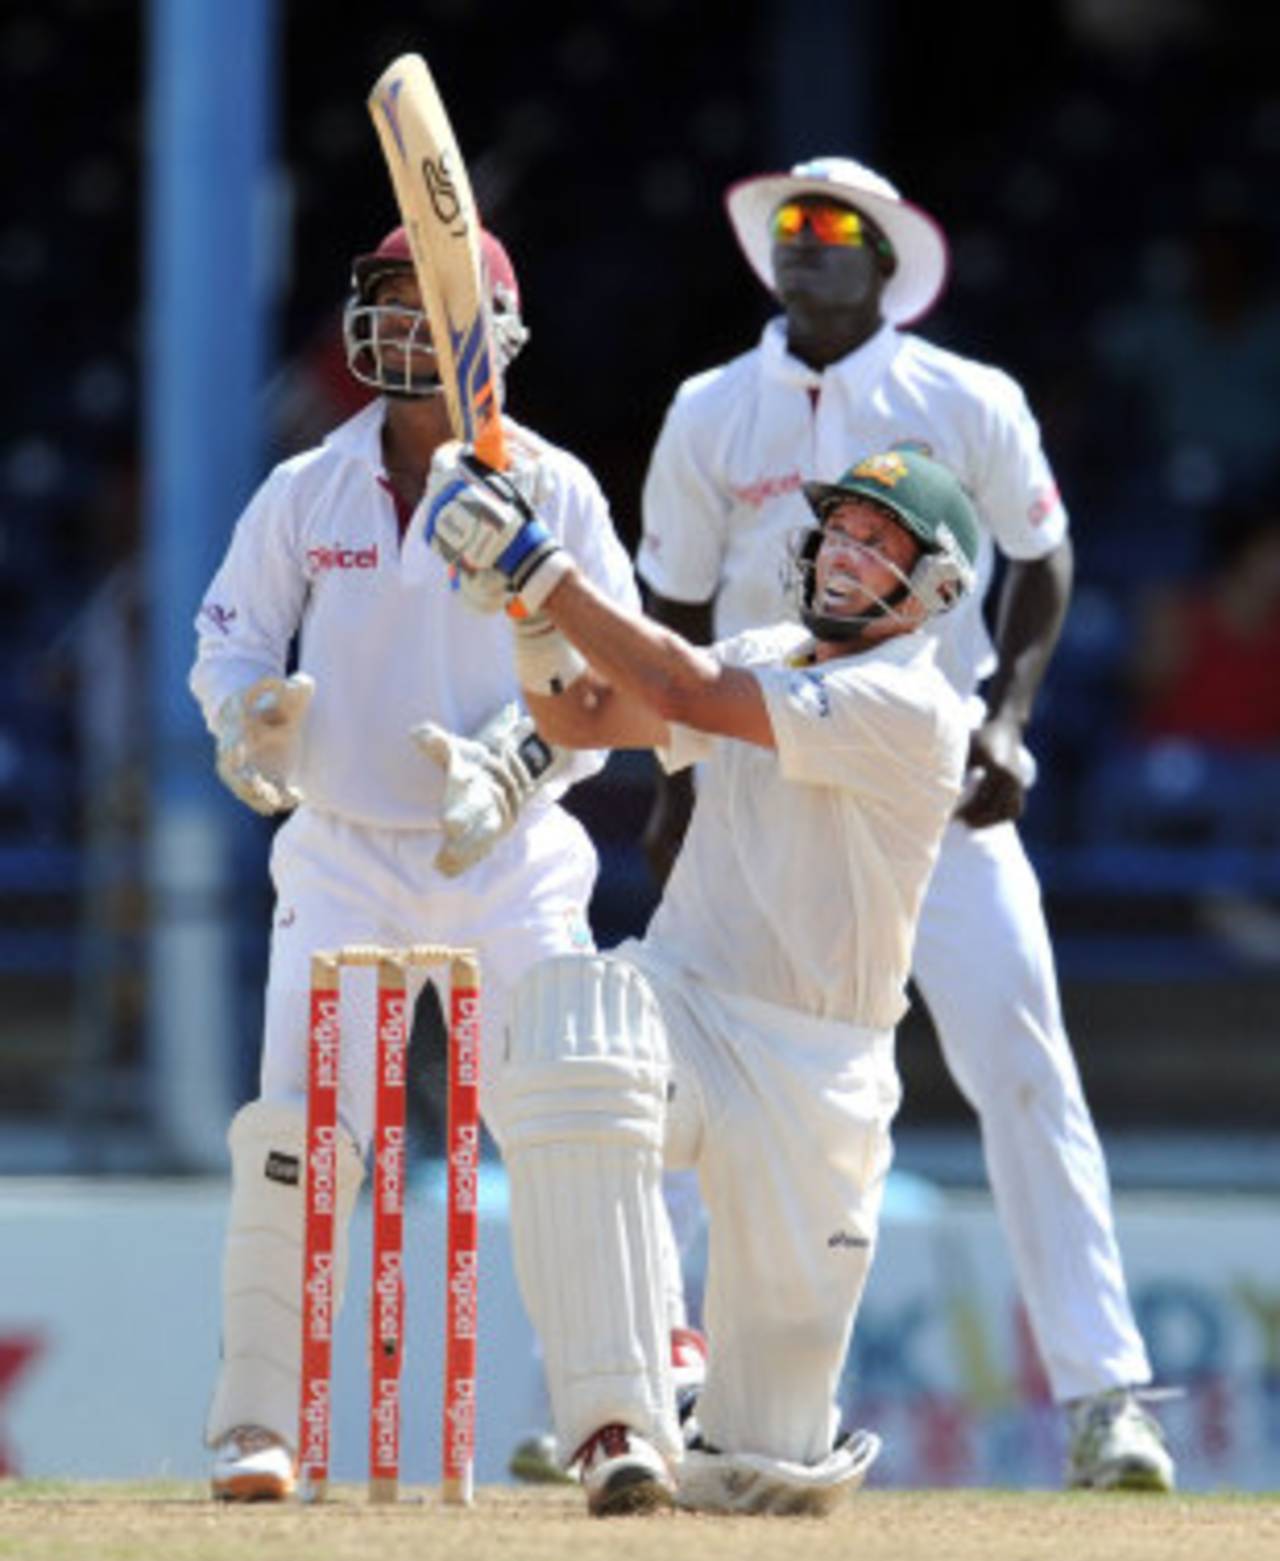 Michael Hussey launches a six over midwicket, West Indies v Australia, 2nd Test, Port-of-Spain, April 16, 2012